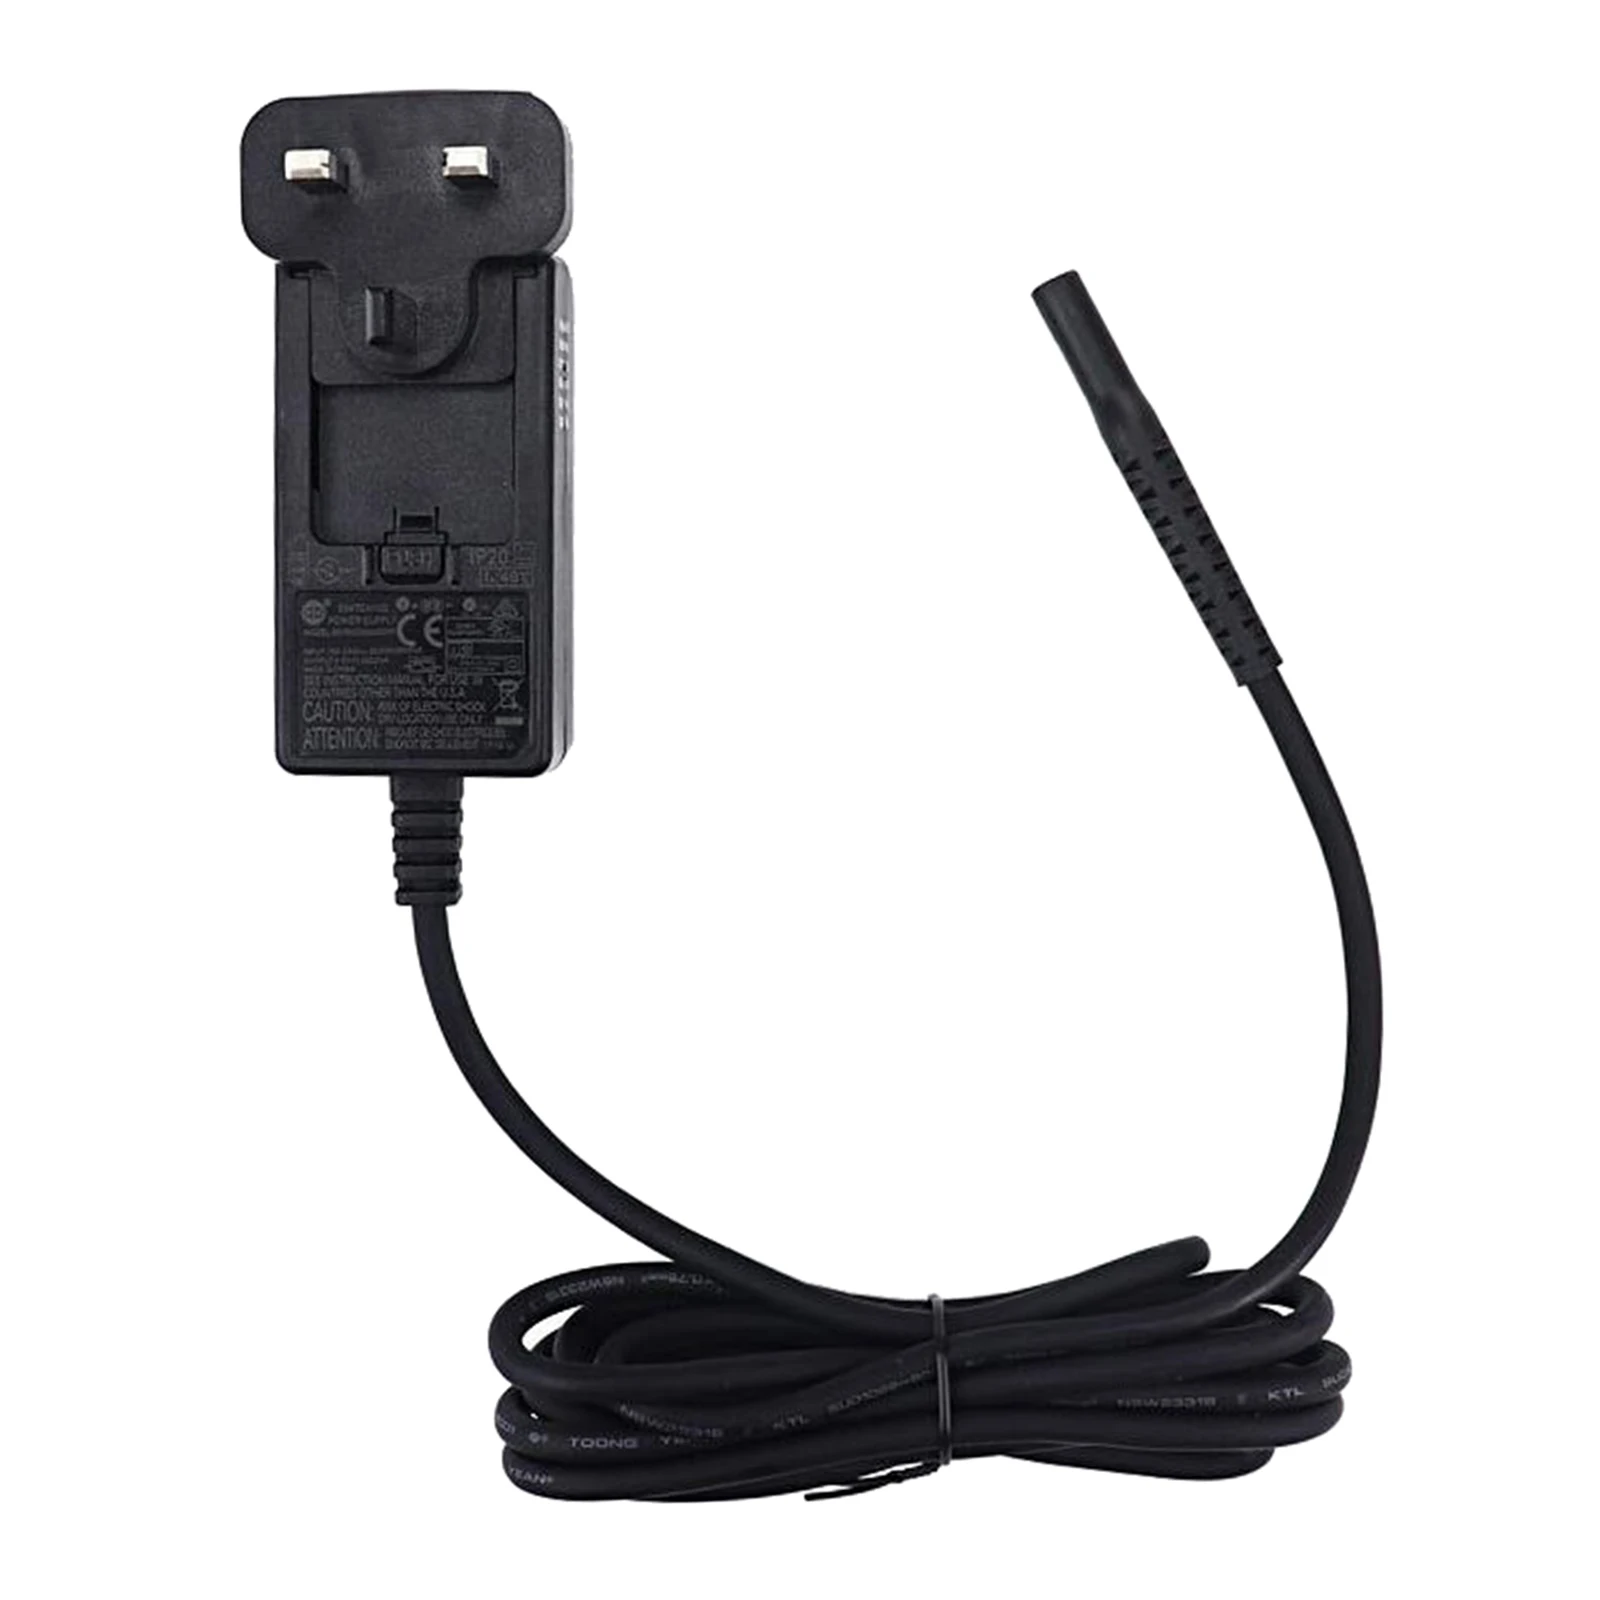 AC Adapter Charger Replacement for Wahl 5-Star 8148 8504 Trimmer UK Plug